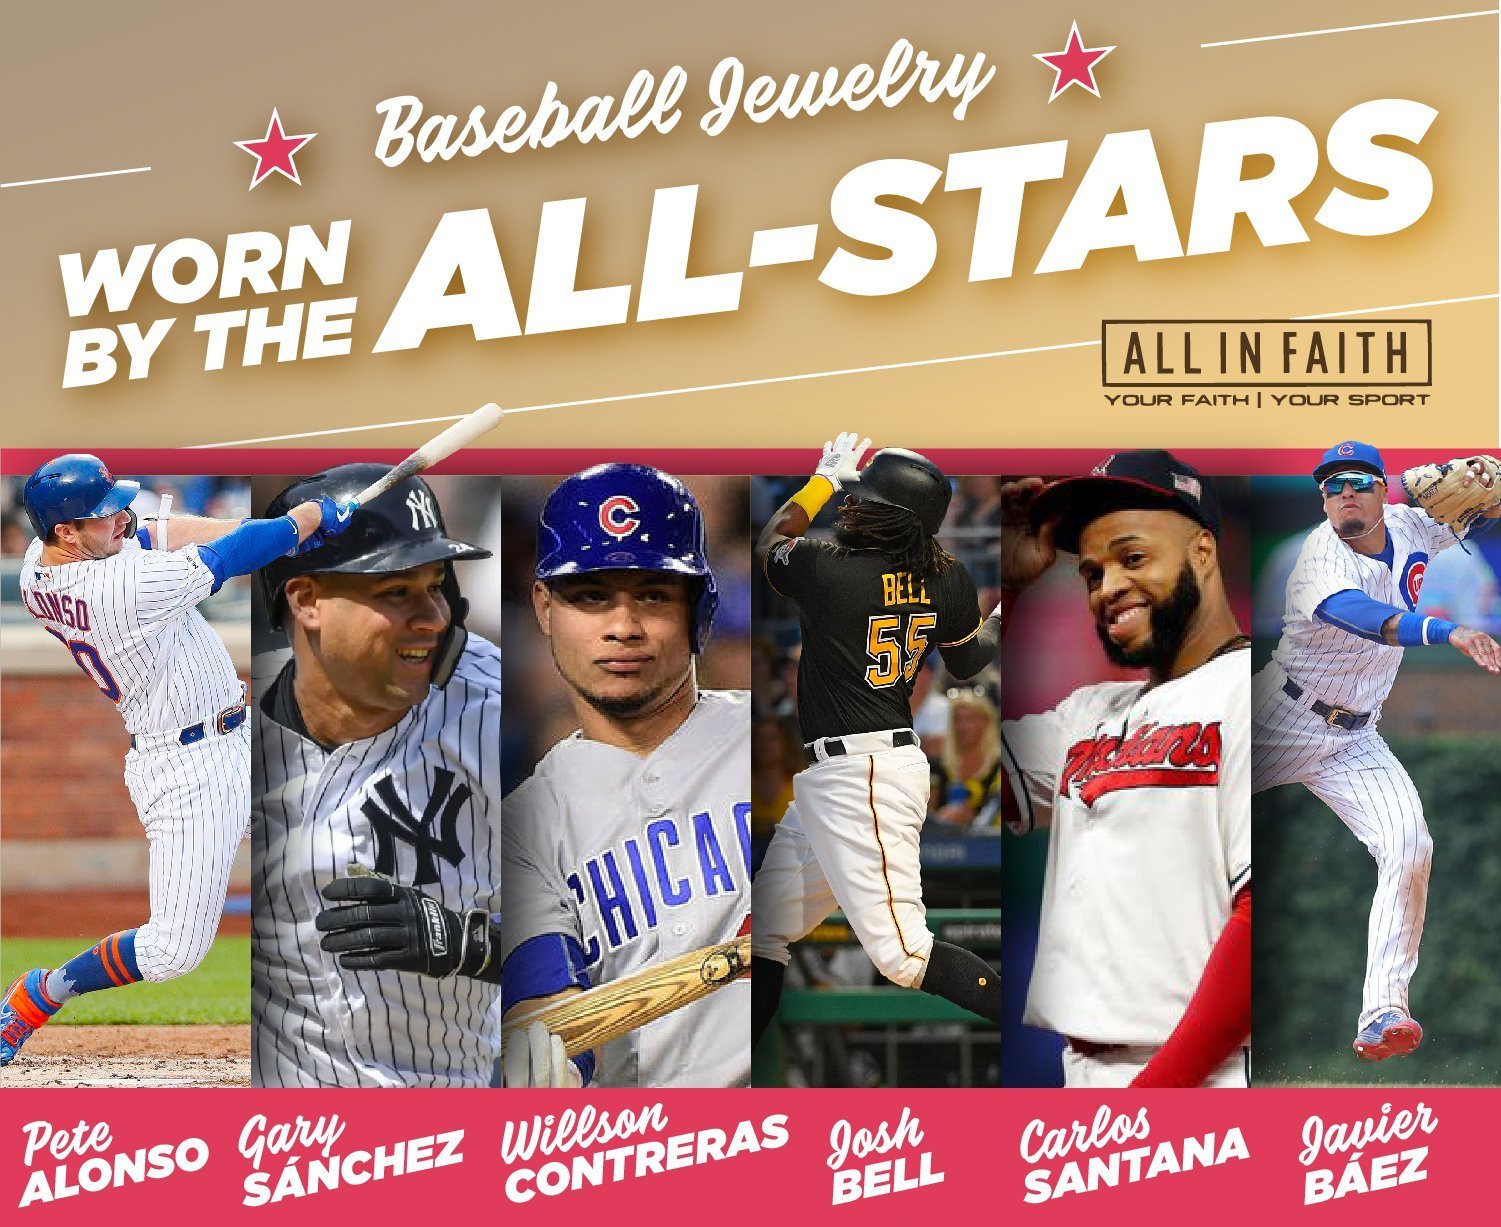 Cubs' Javier Baez and Willson Contreras named 2019 NL All-Star starters